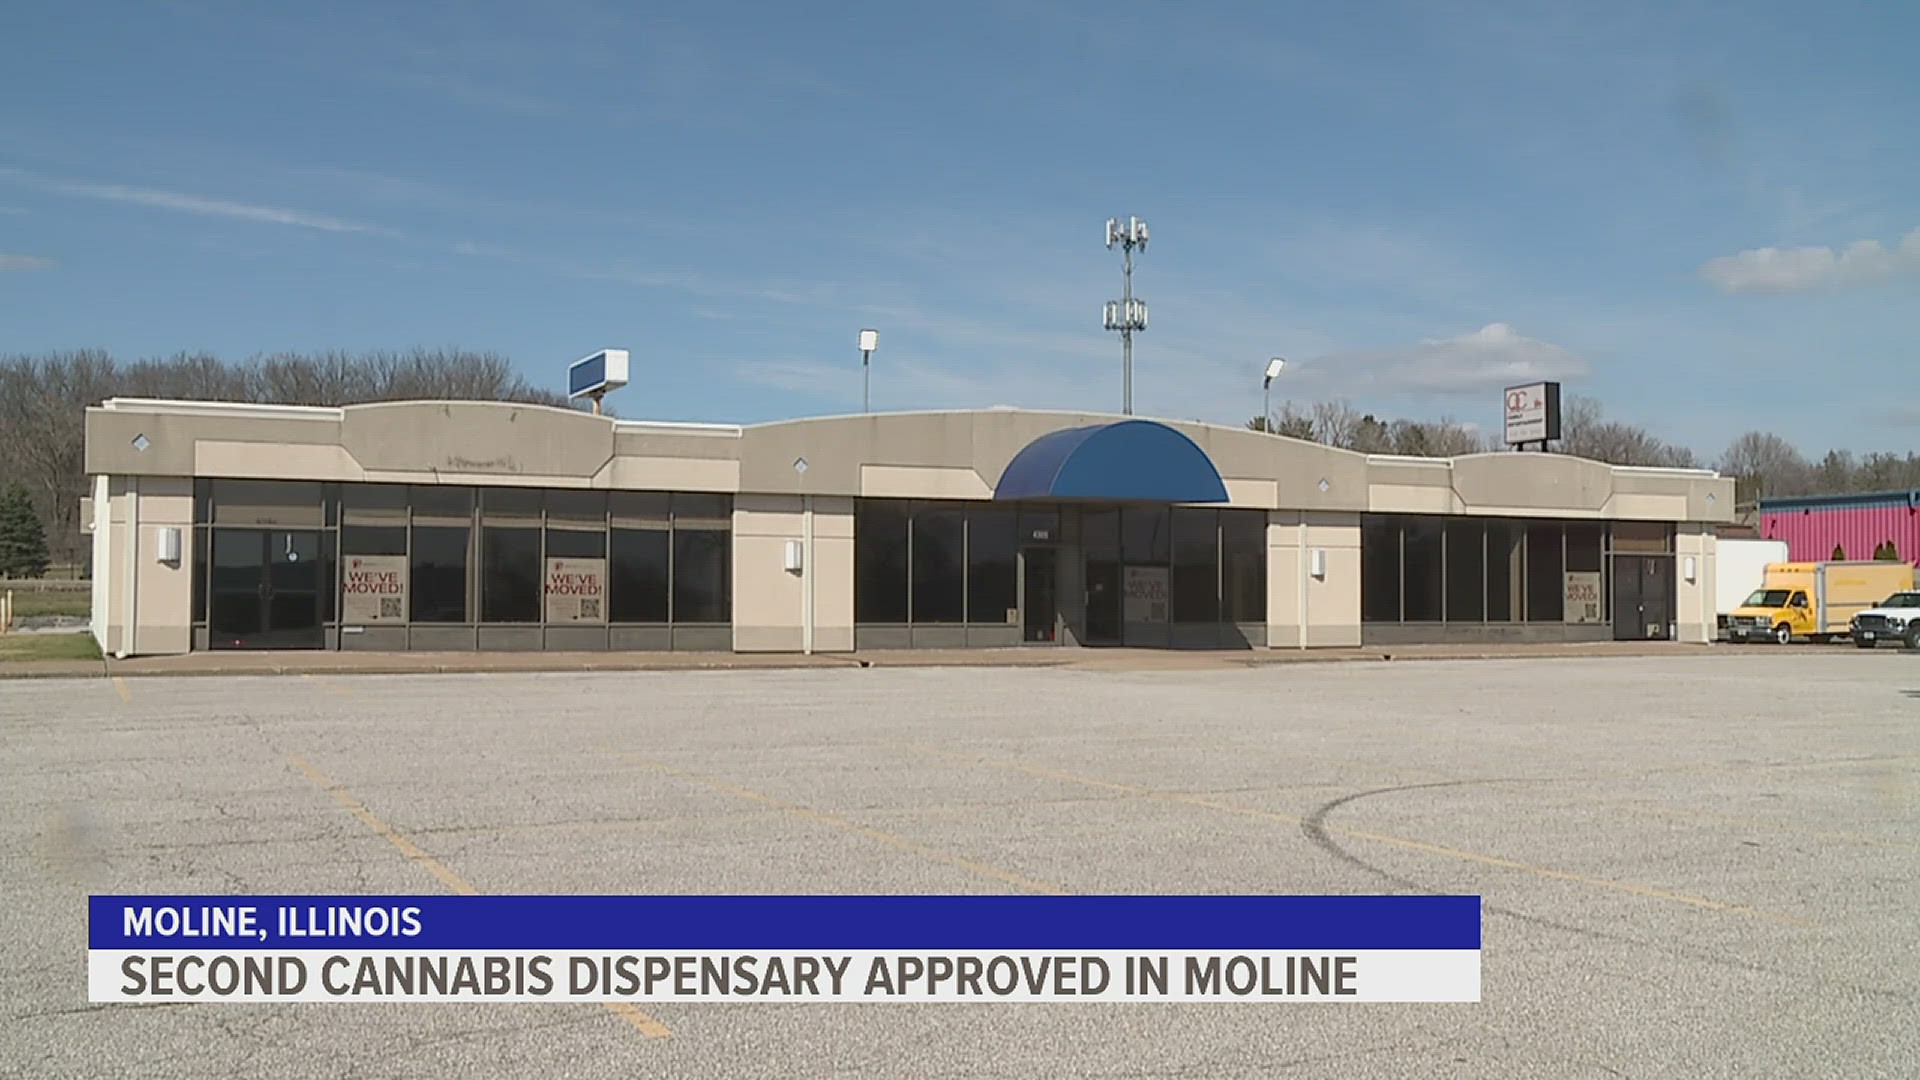 Moline City Council voted 5-2 to give final approval for a second dispensary at 4301 44th Ave., in the John Deere Corridor district overlay.